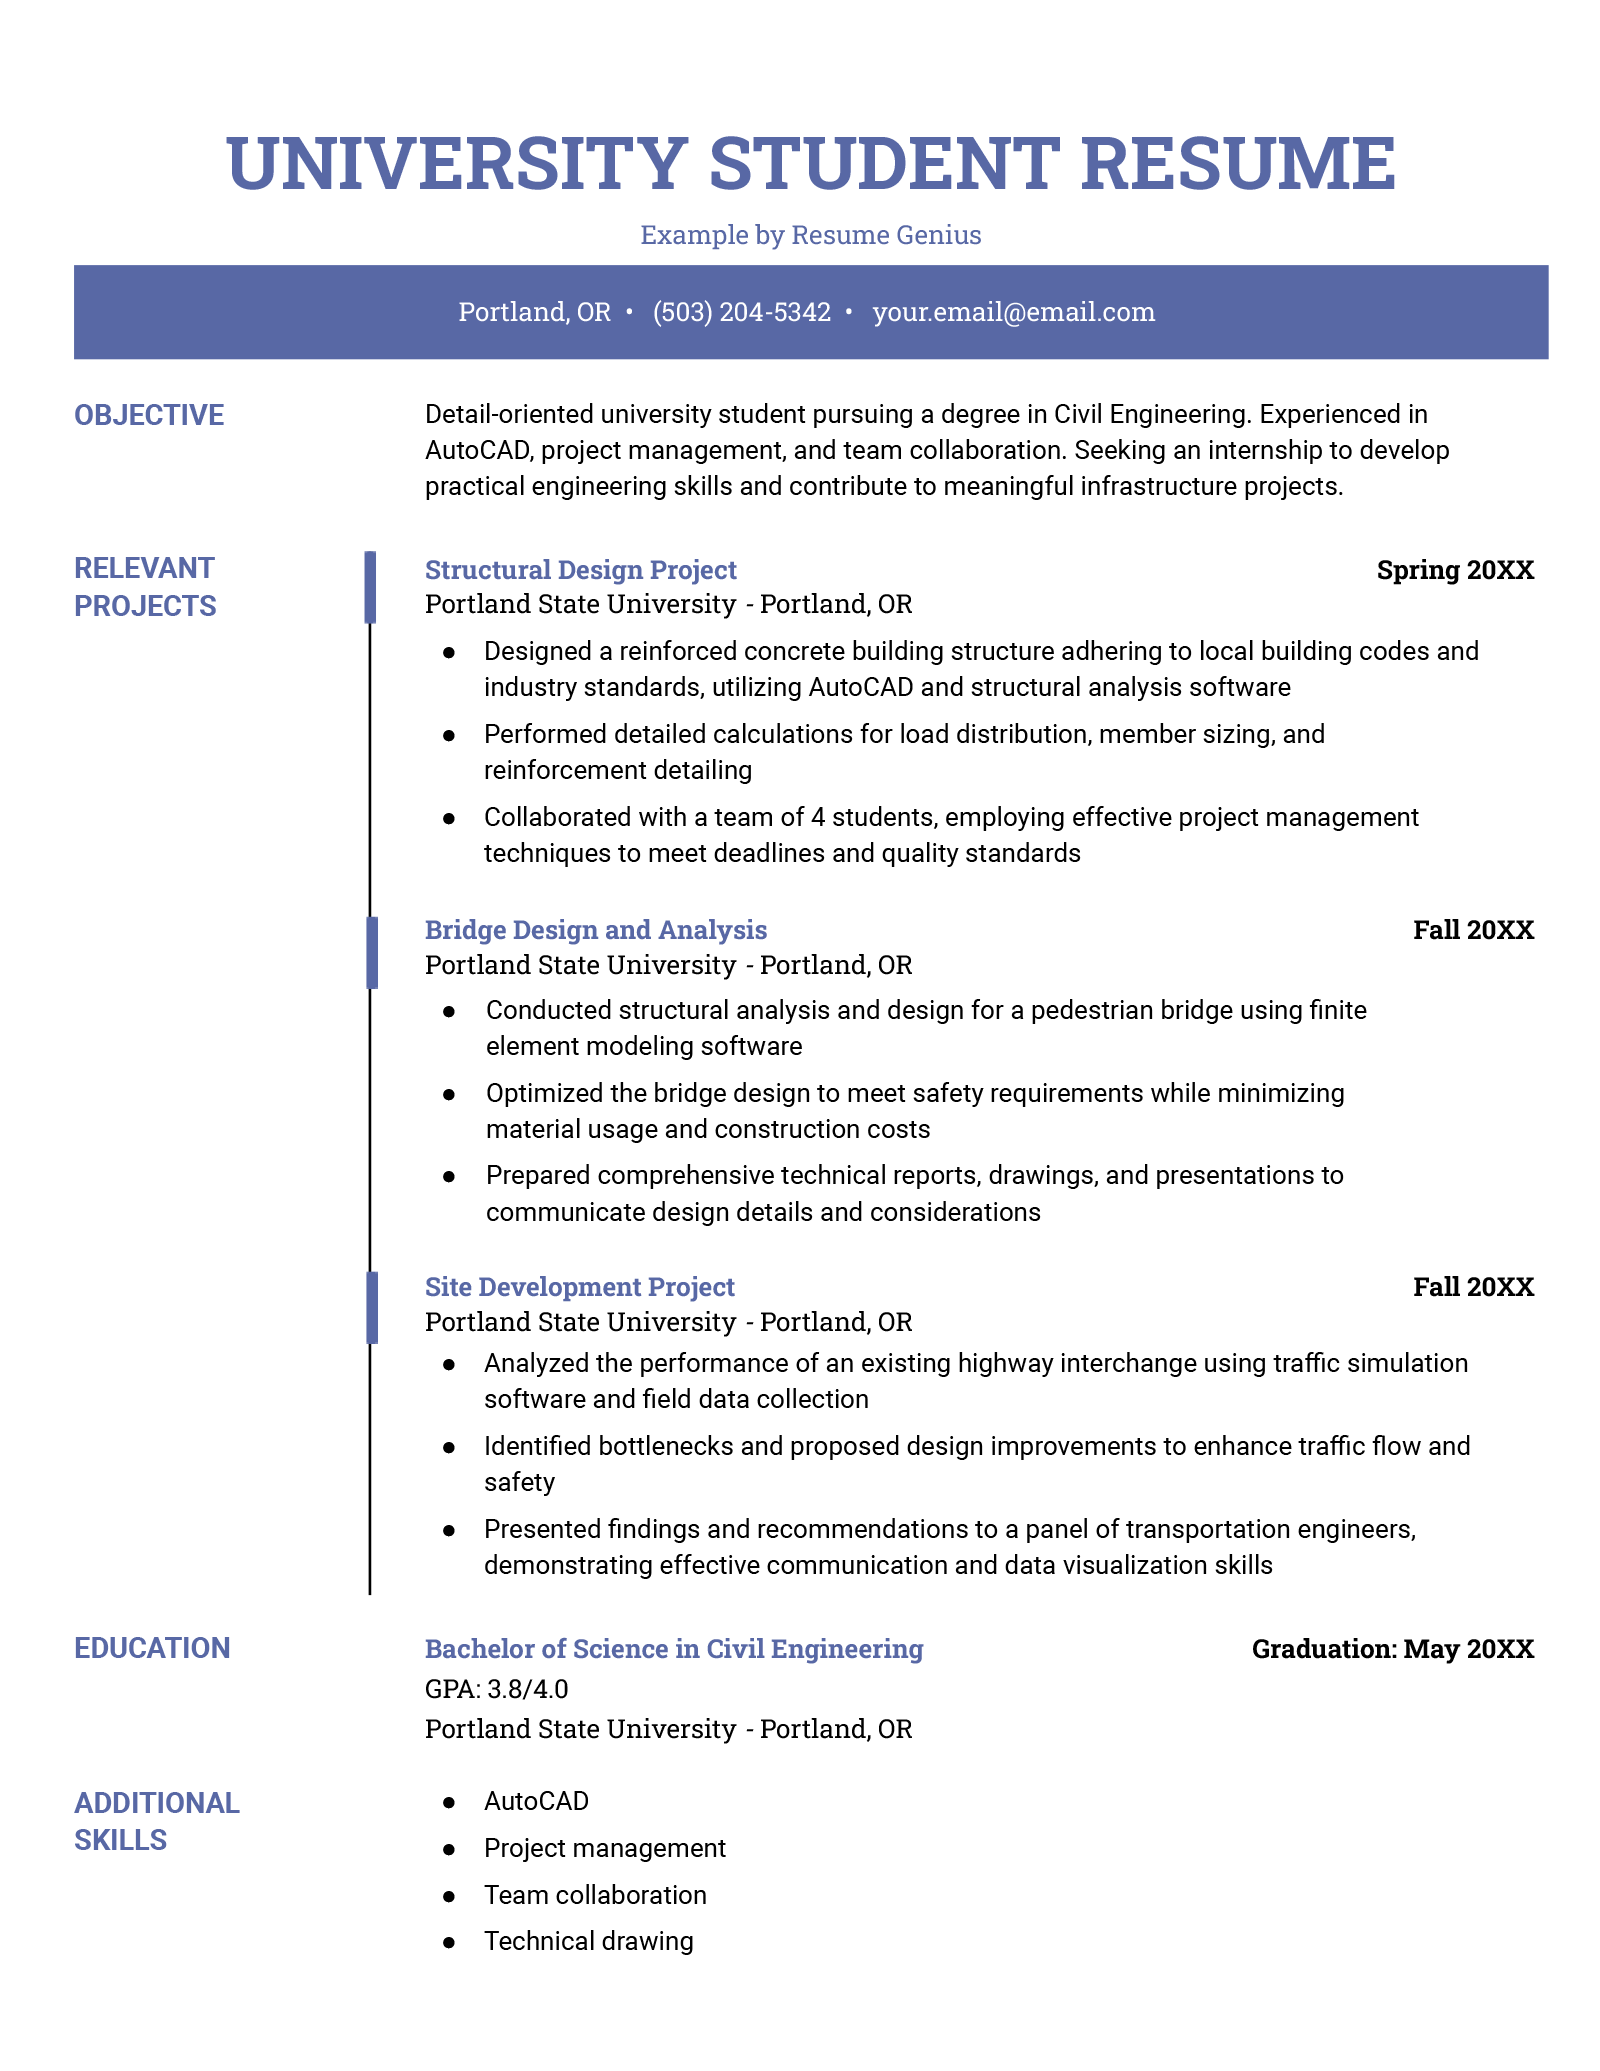 An example resume for a university student.